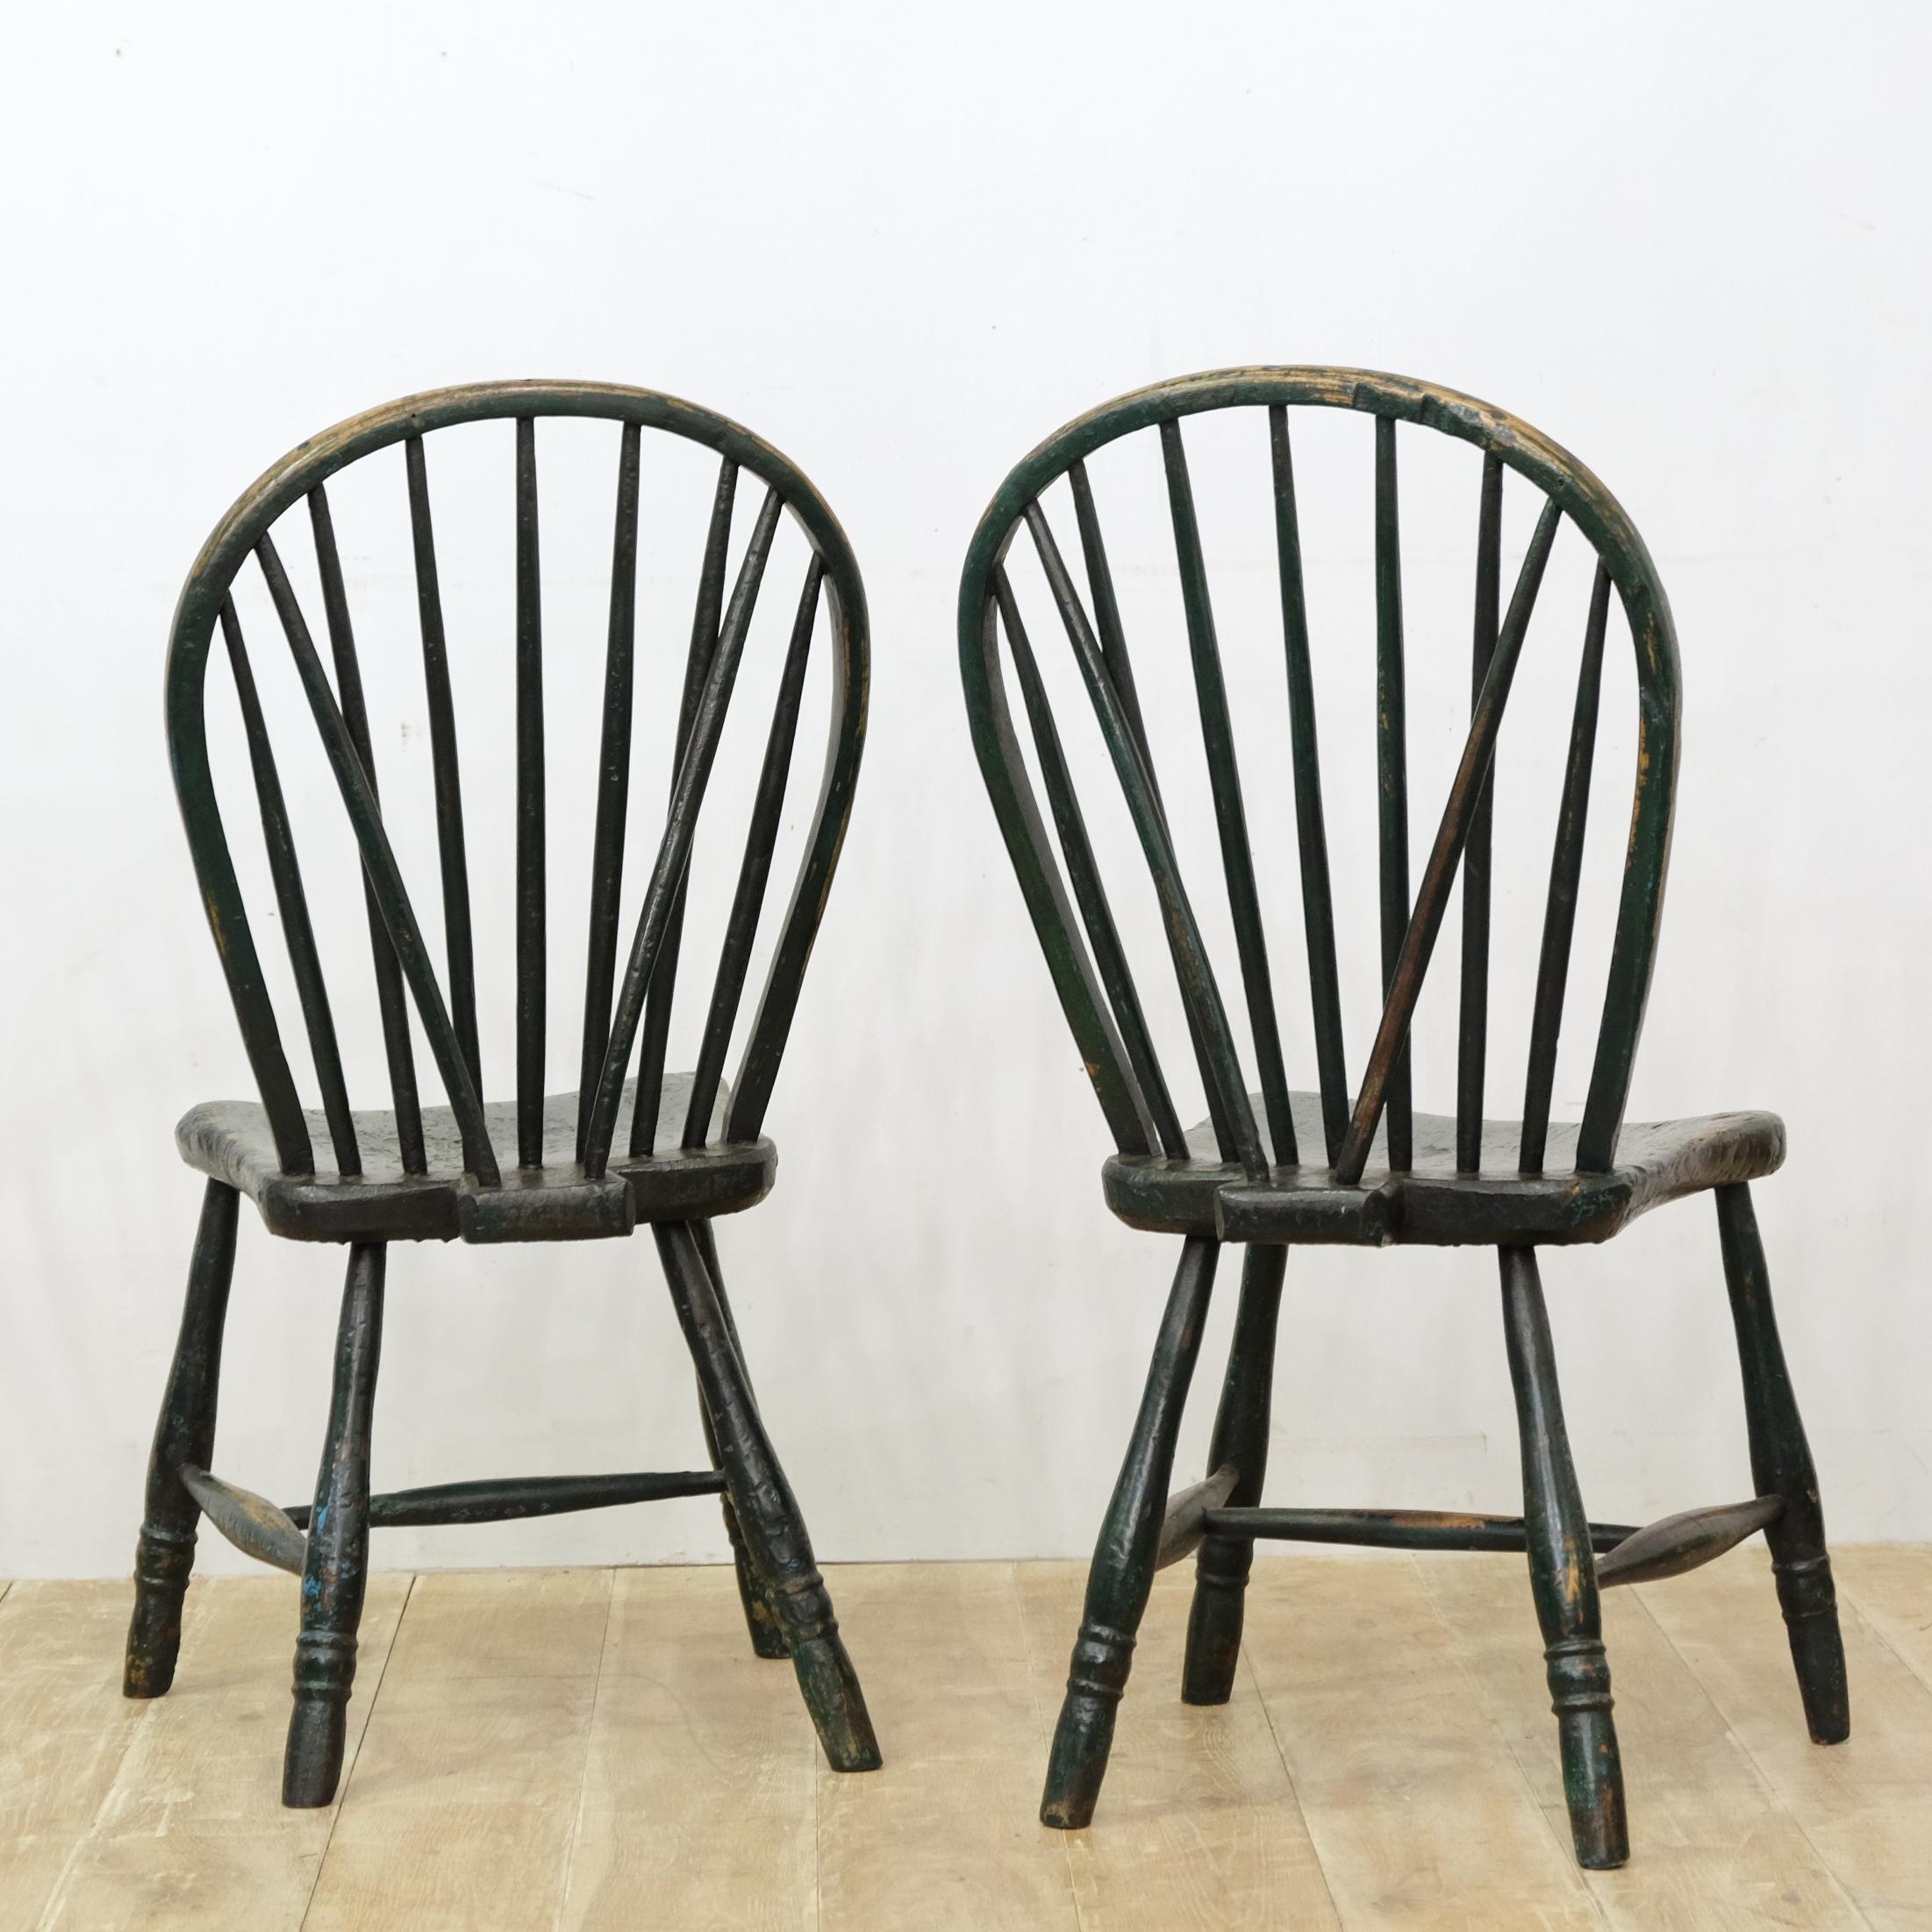 British Pair of English Country Side Chairs, Primitive, West Country, Naive, Old Paint